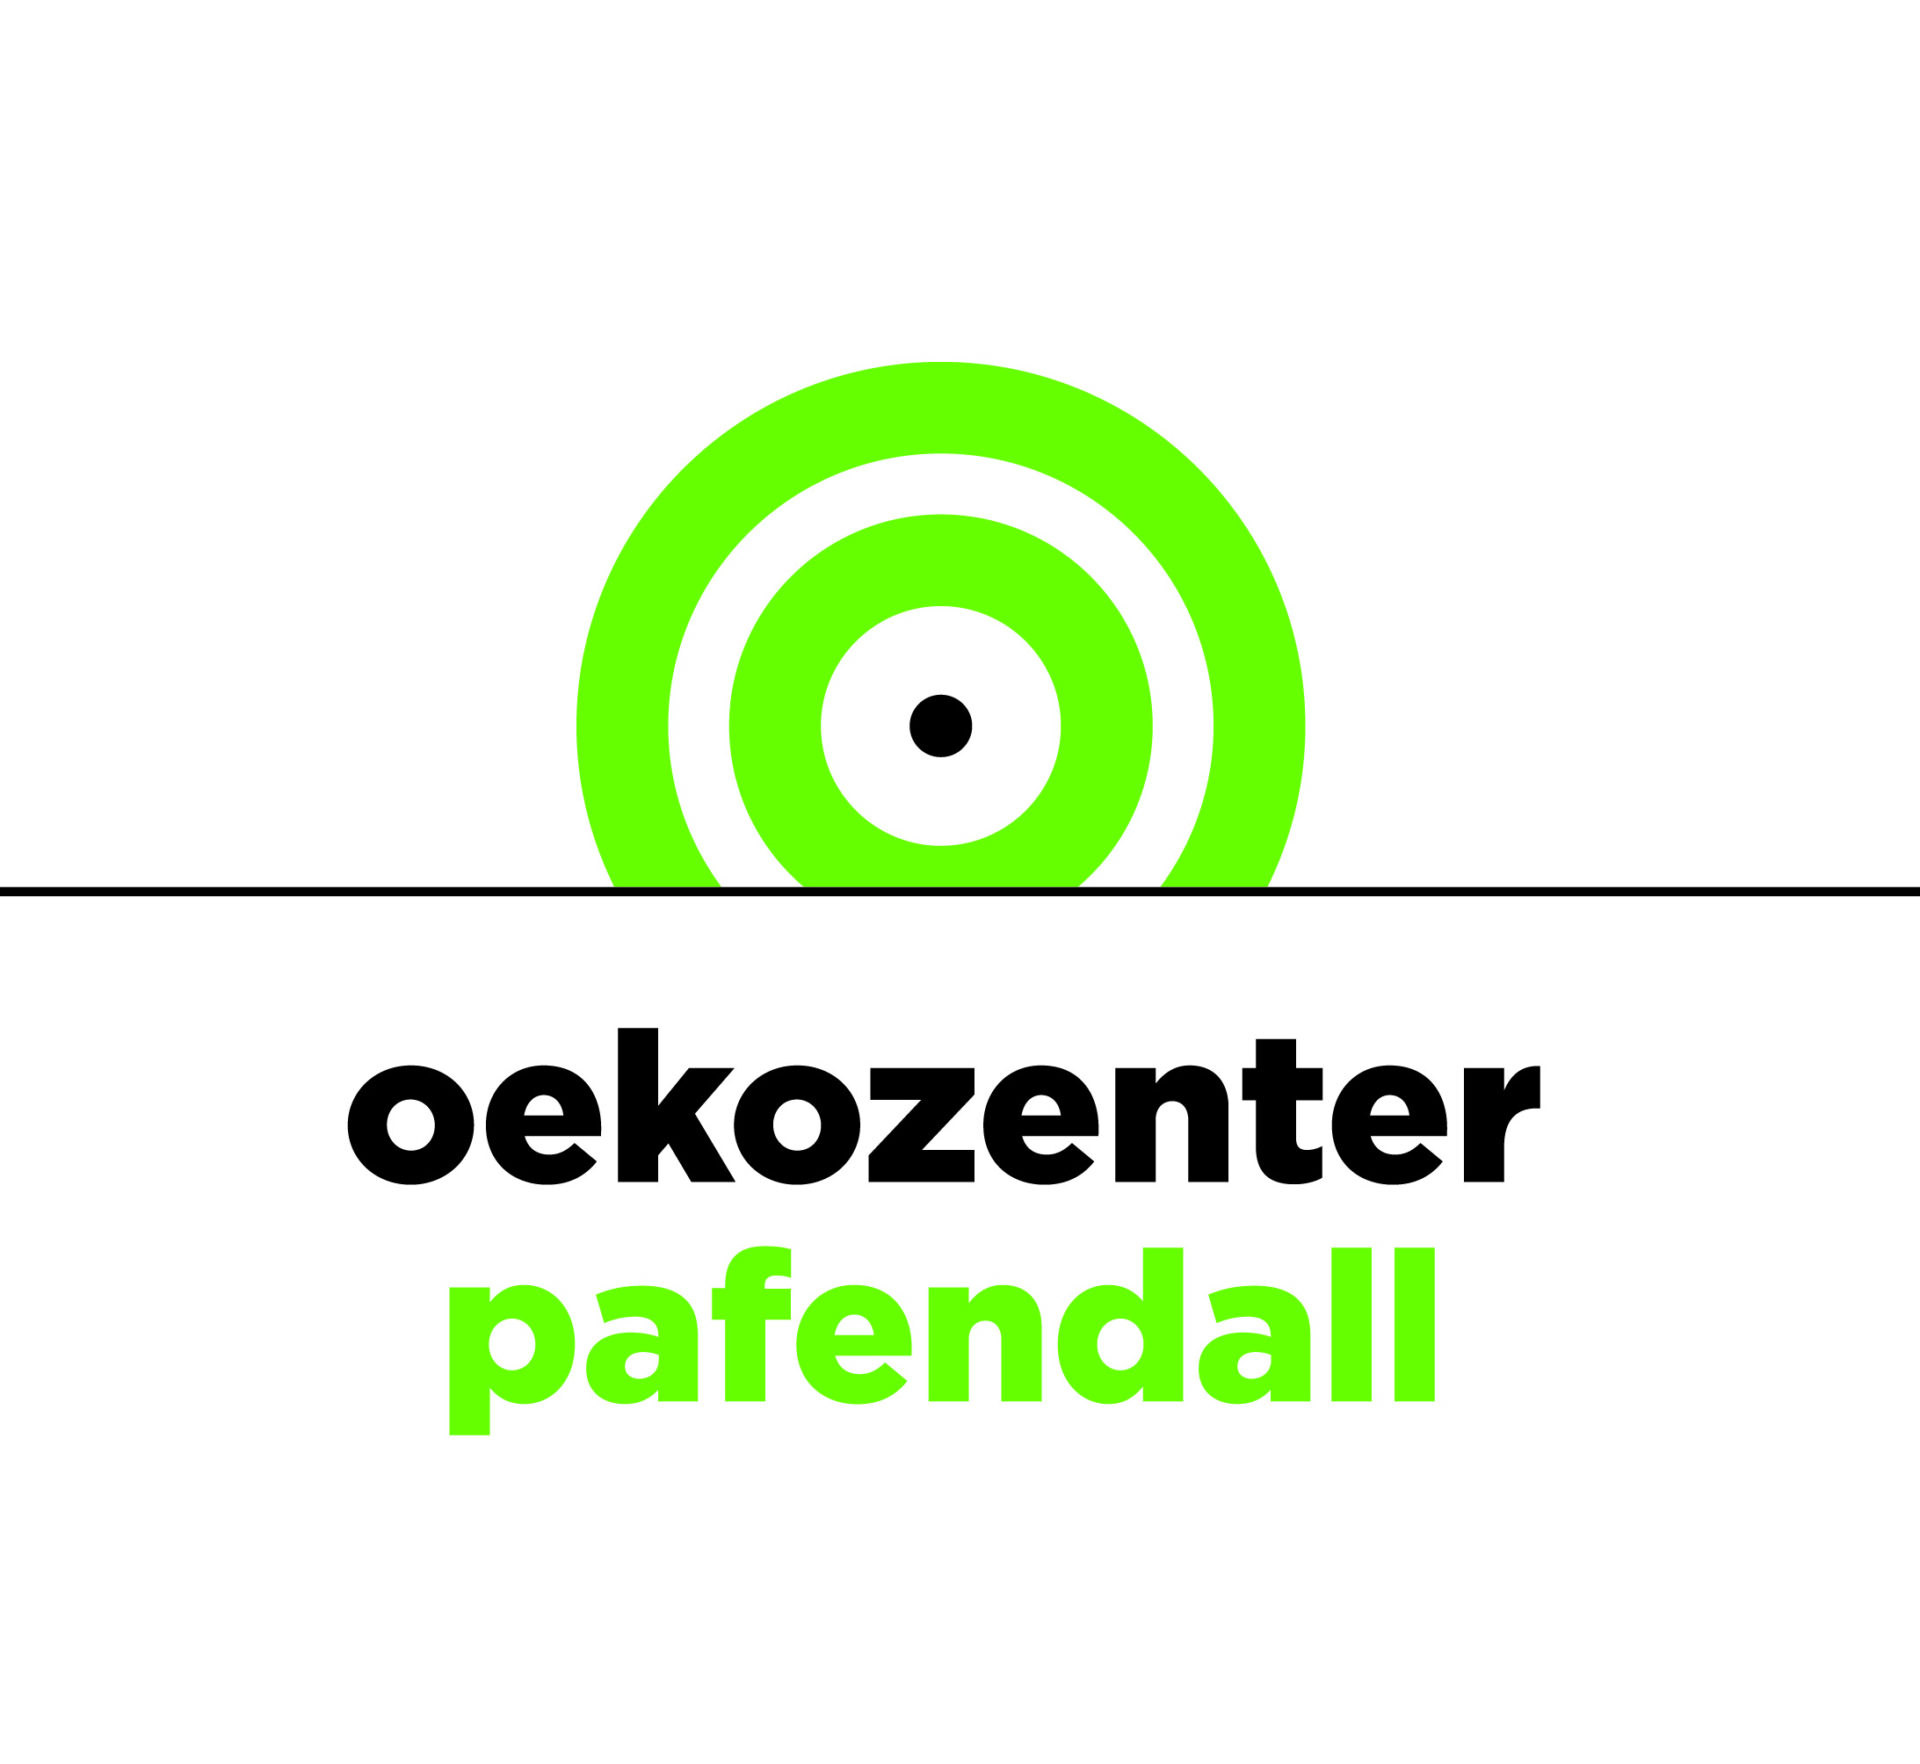 Oekozenter Pafendall asbl